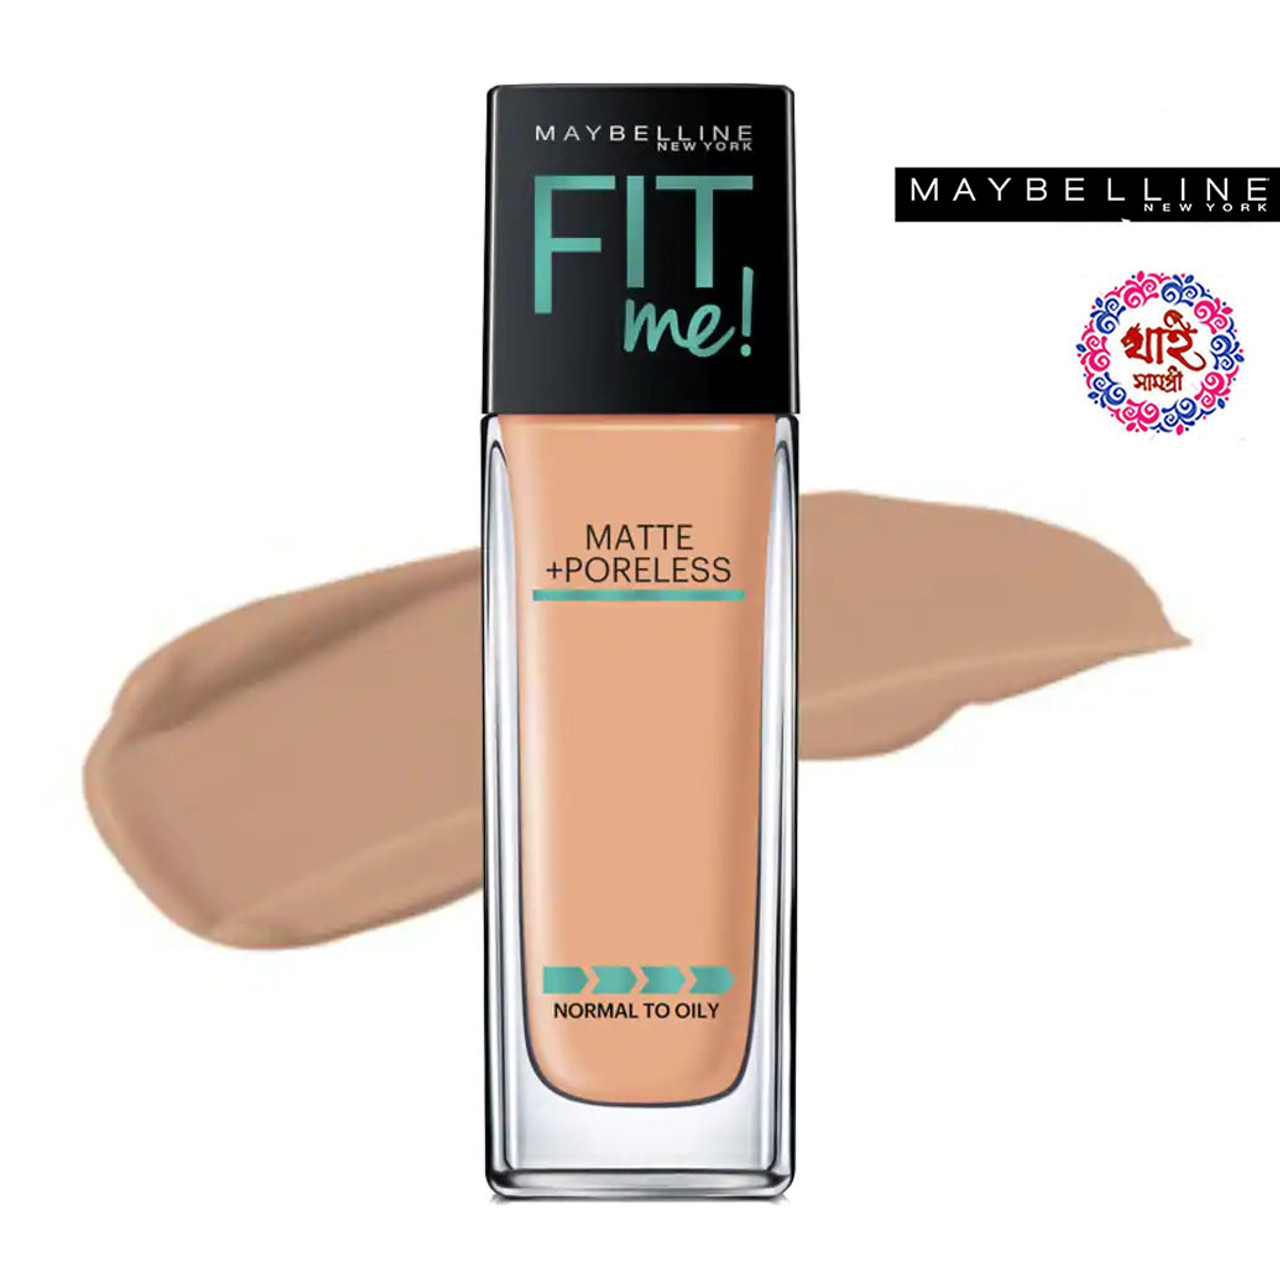 https://cdn11.bigcommerce.com/s-iw1z8eqogn/images/stencil/1280x1280/products/711/1991/Maybelline_Fit_Me_Matte_And_Poreless_Foundation_235_Pure_Beige__69768.1562042023.jpg?c=2